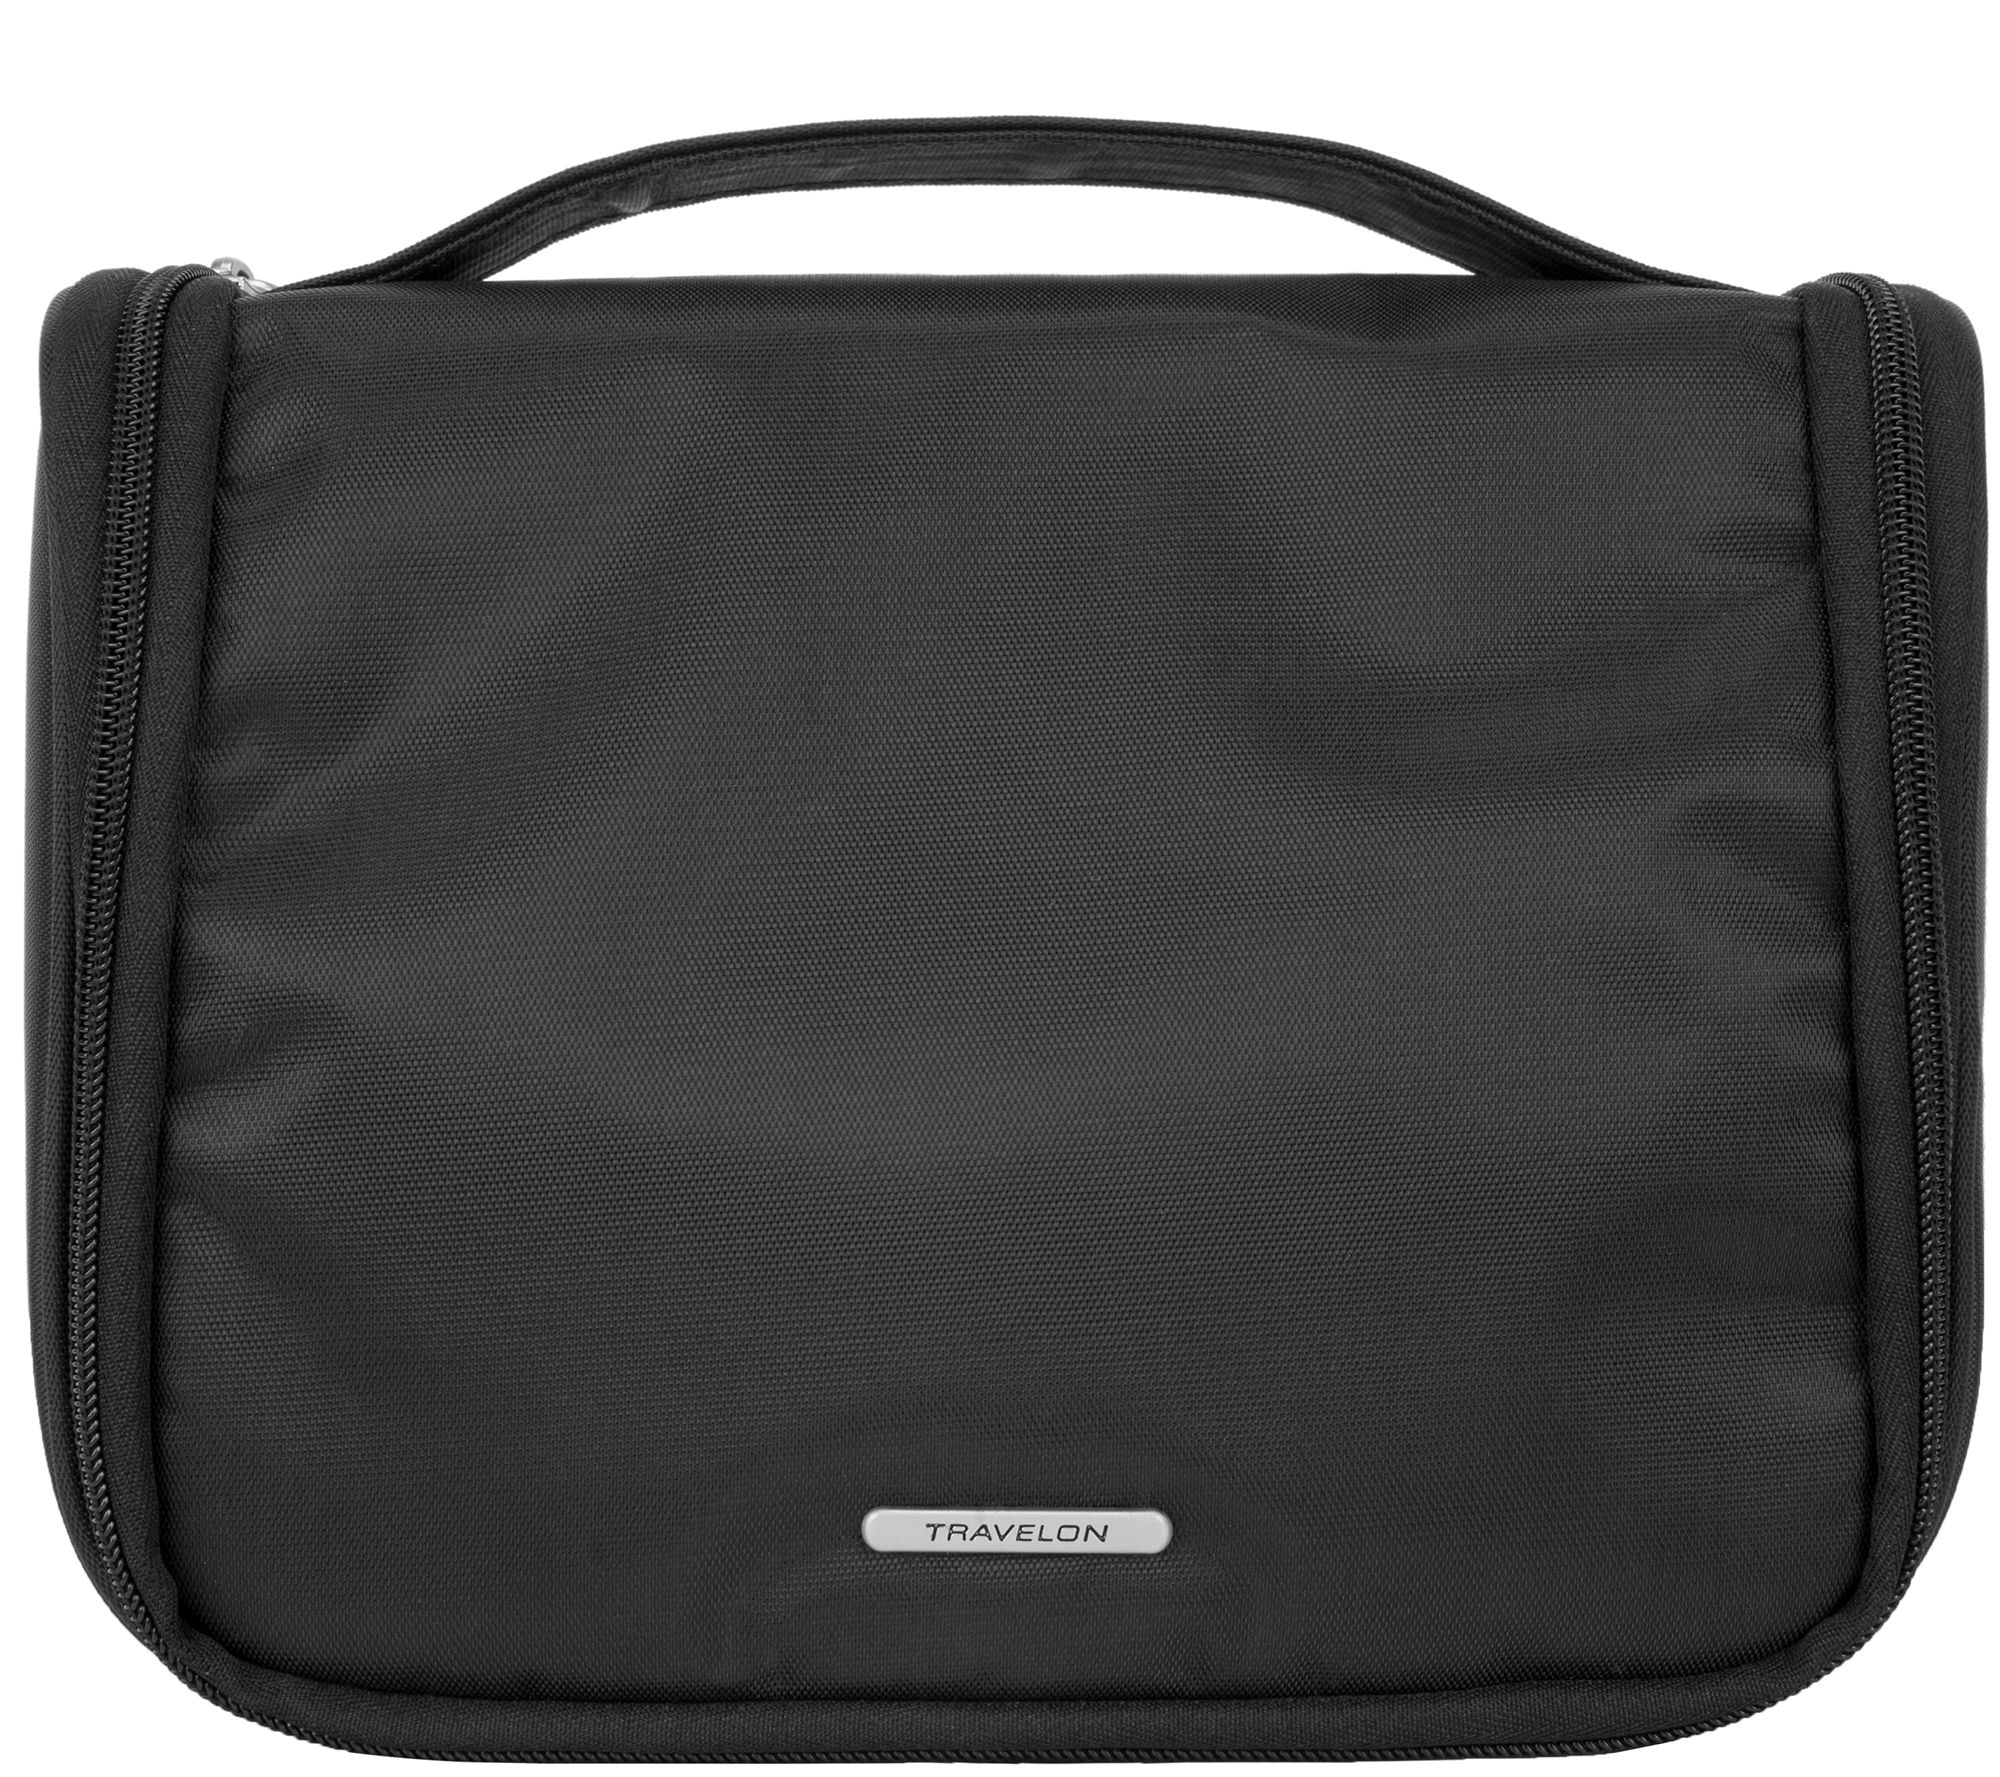 Lug Hanging Toiletry Case - Caddy 